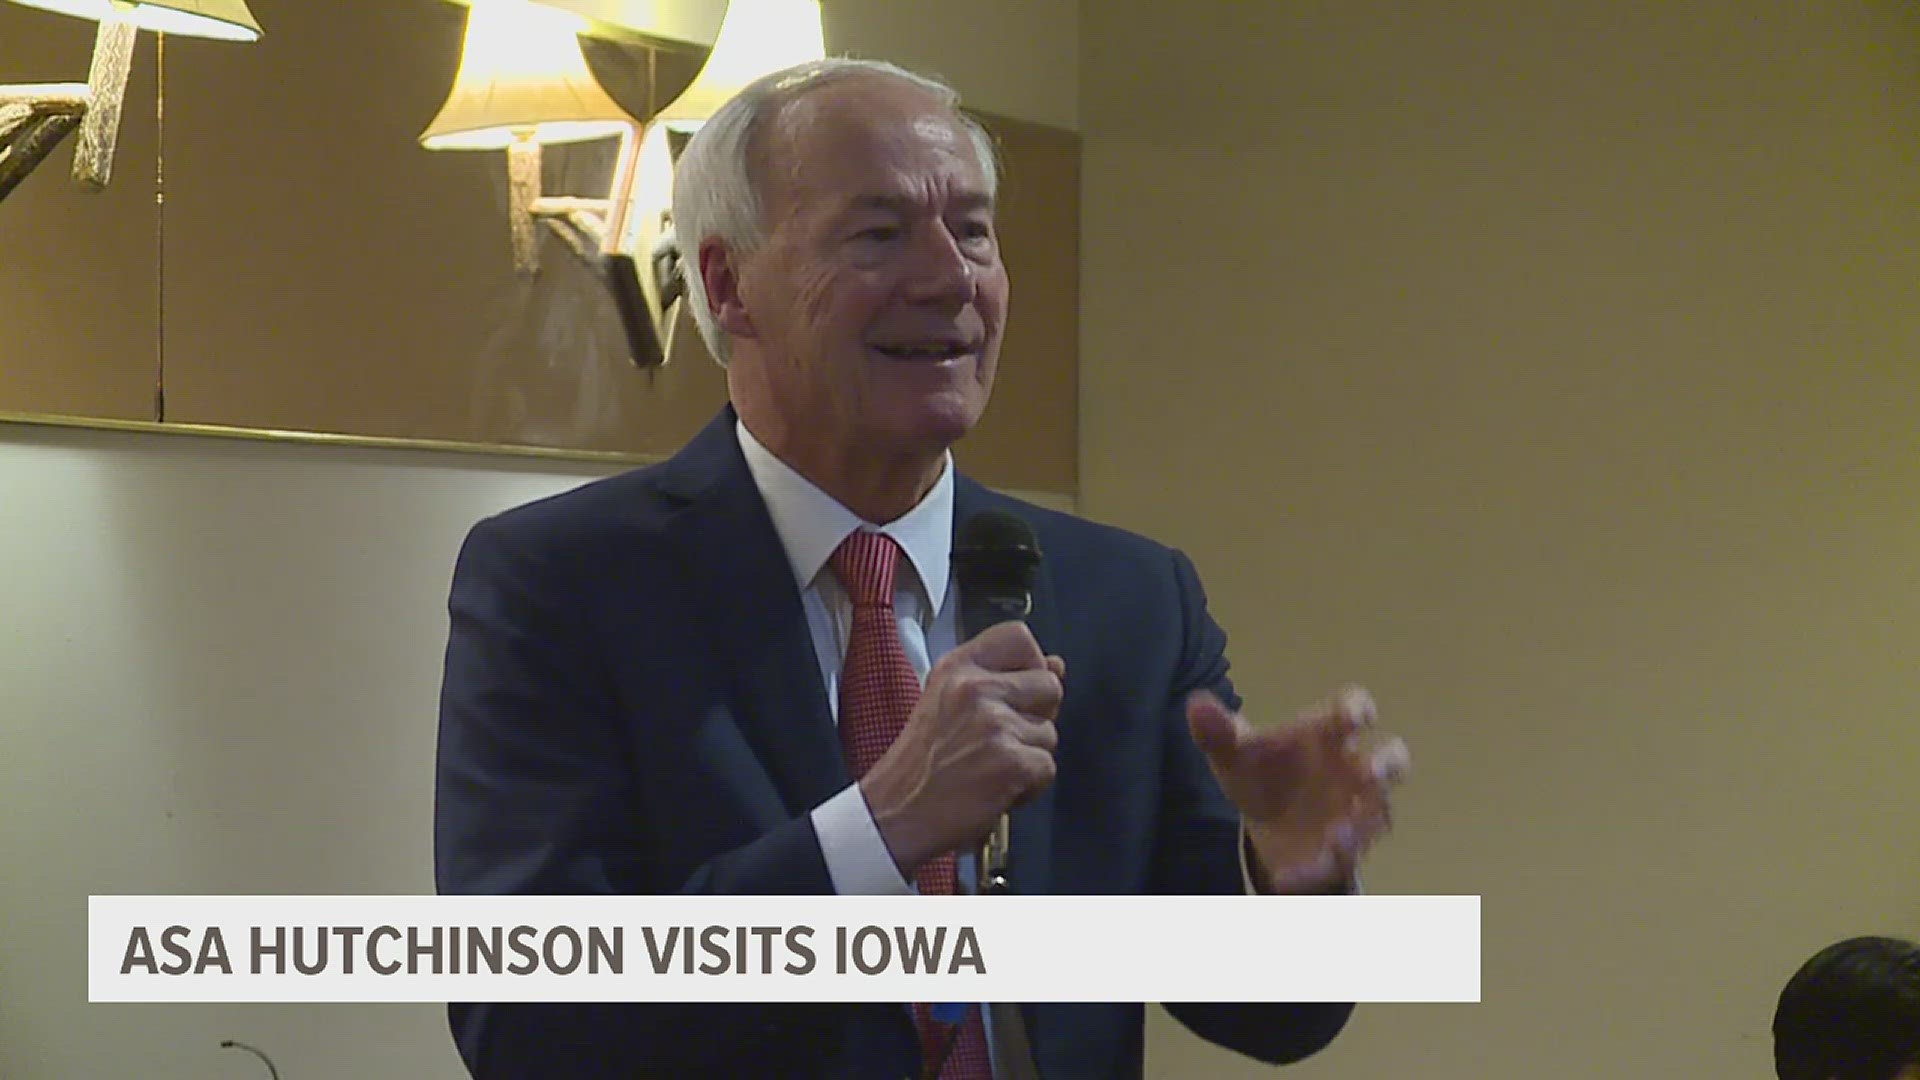 The former Arkansas governor also visited Muscatine the same day, speaking face-to-face with voters.